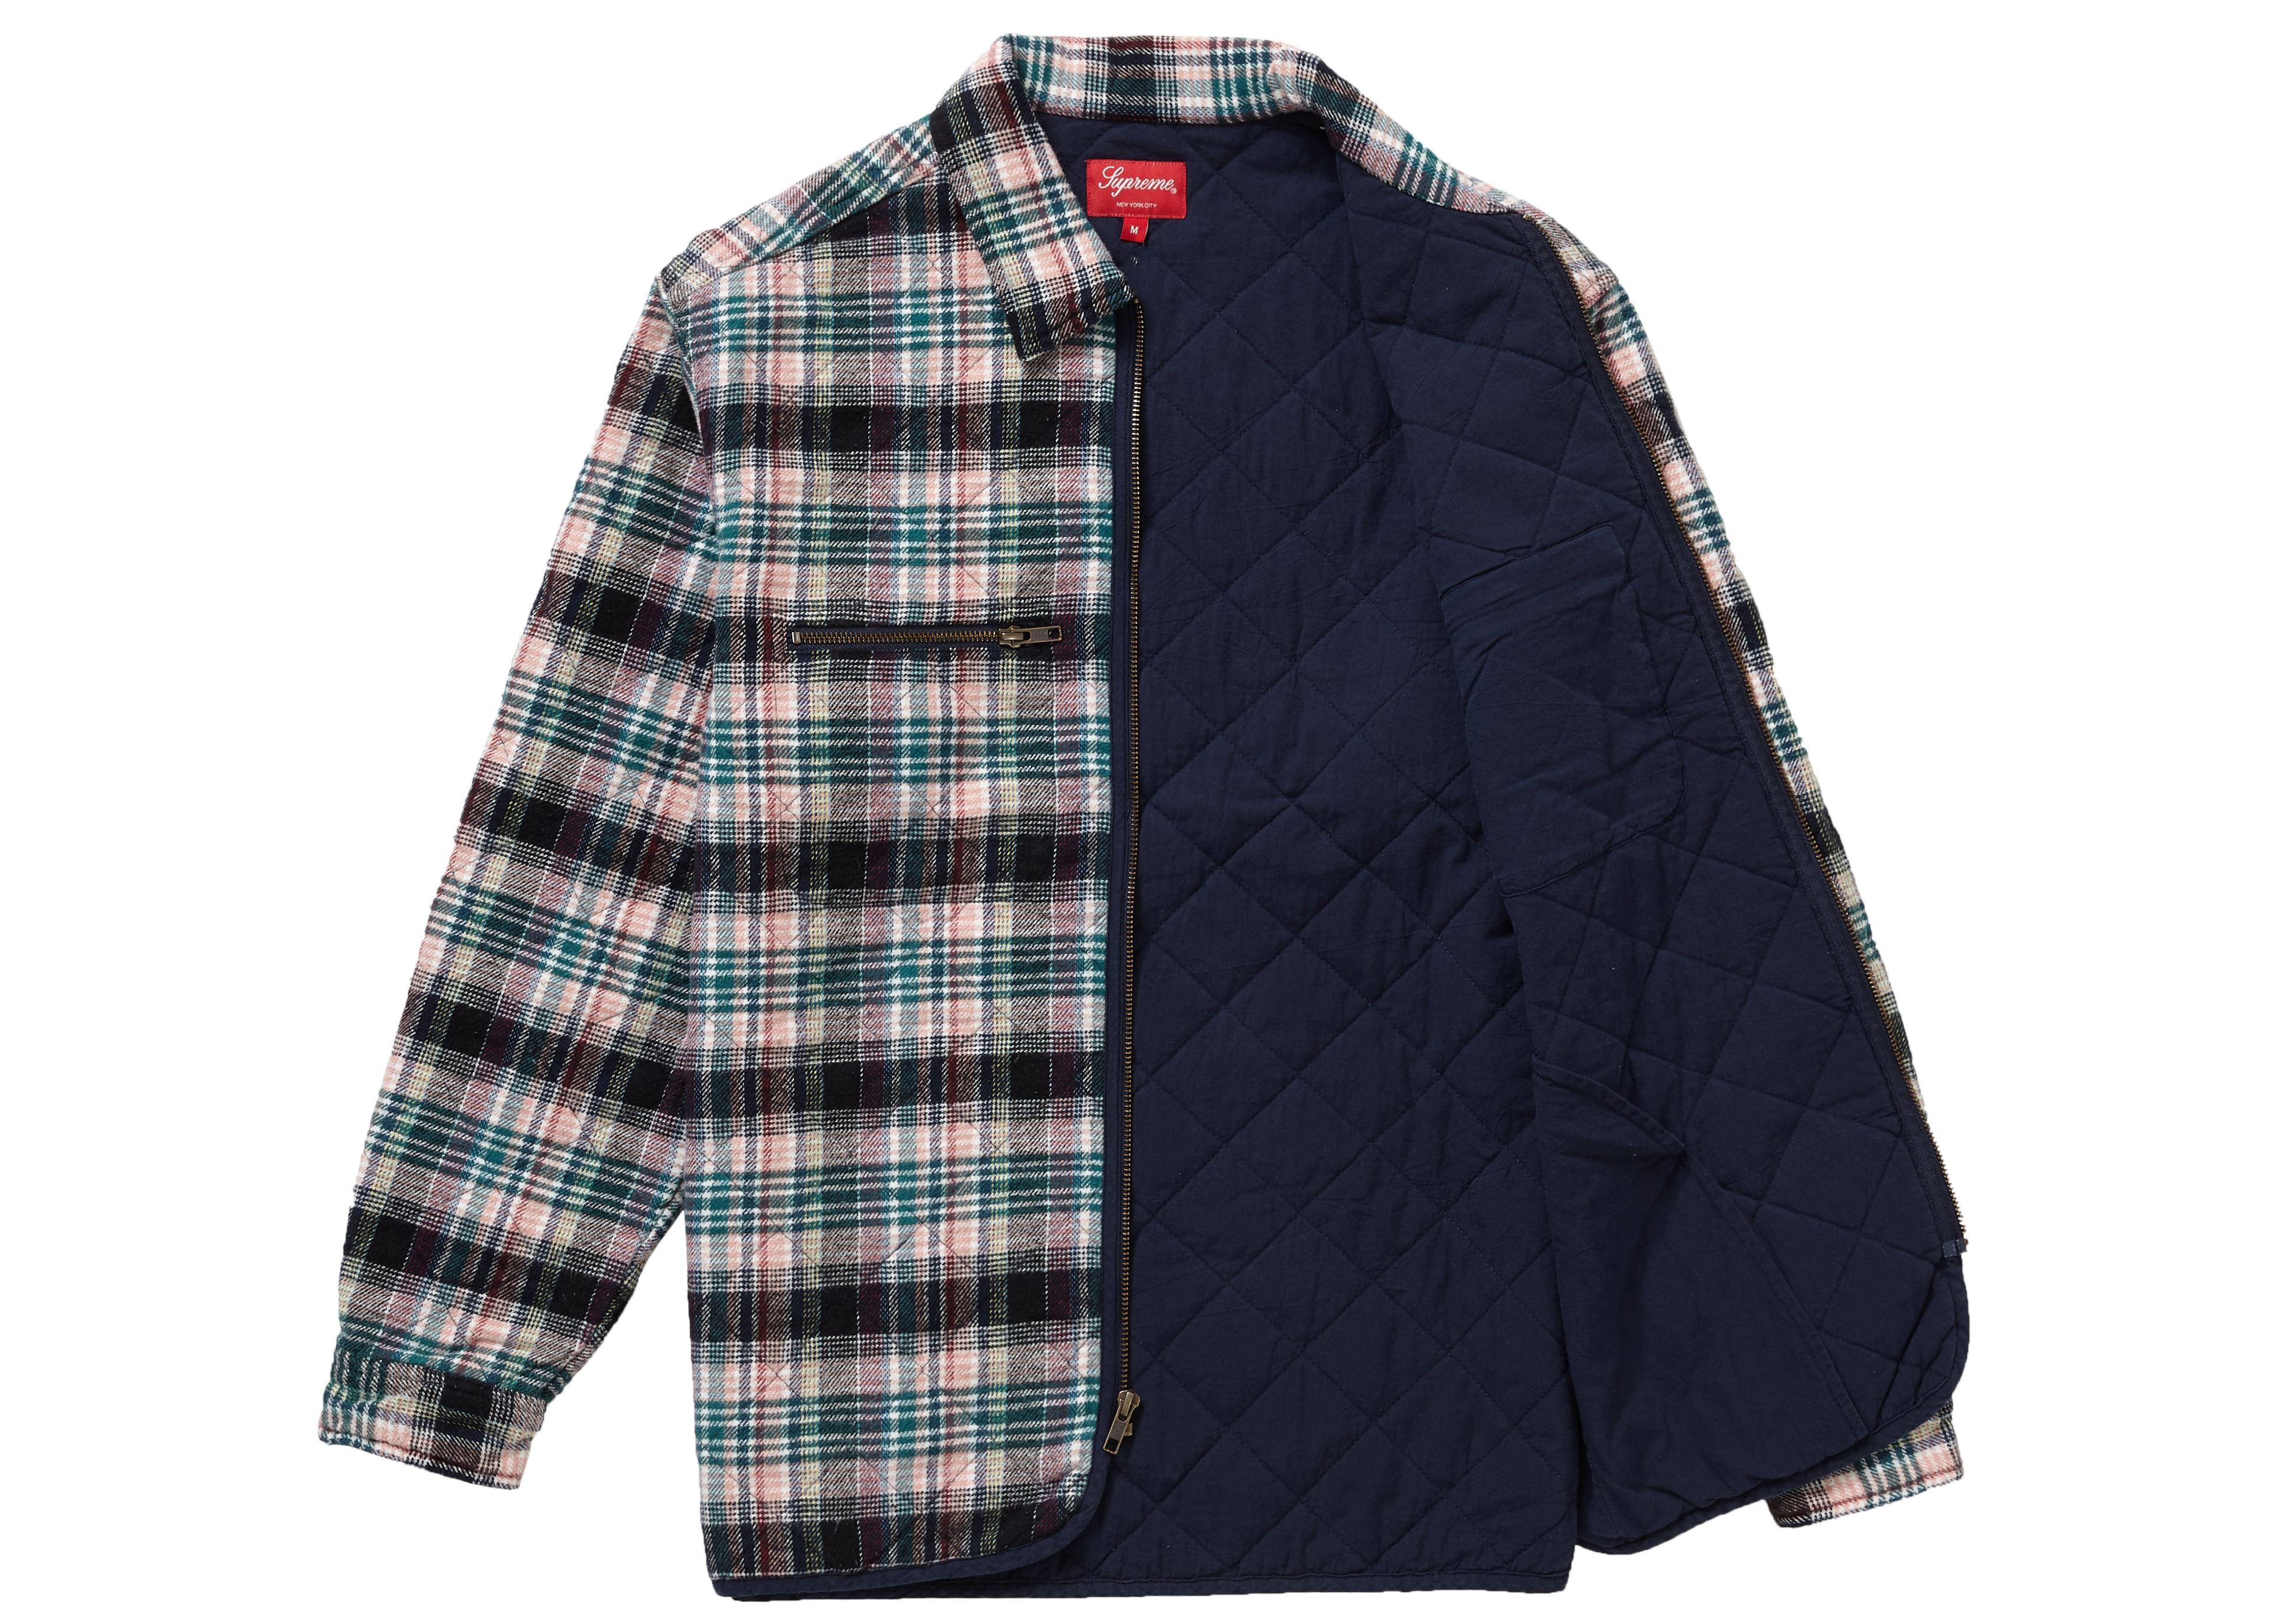 Supreme Quilted Plaid Zip Up Shirt OffWhite Men's - FW19 - US